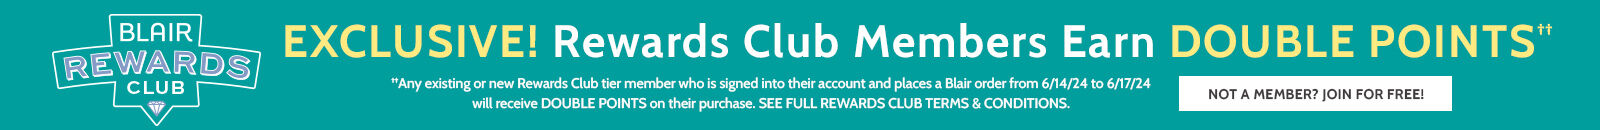 blair rewards club exclusive! rewards club members earn double points†† not a member? join for free ††any existing or new rewards club tier member who is signed into their account and places a Blair order from 6/14/24 to 6/17/24 will receive double points on their purchase. See full rewards terms & conditions